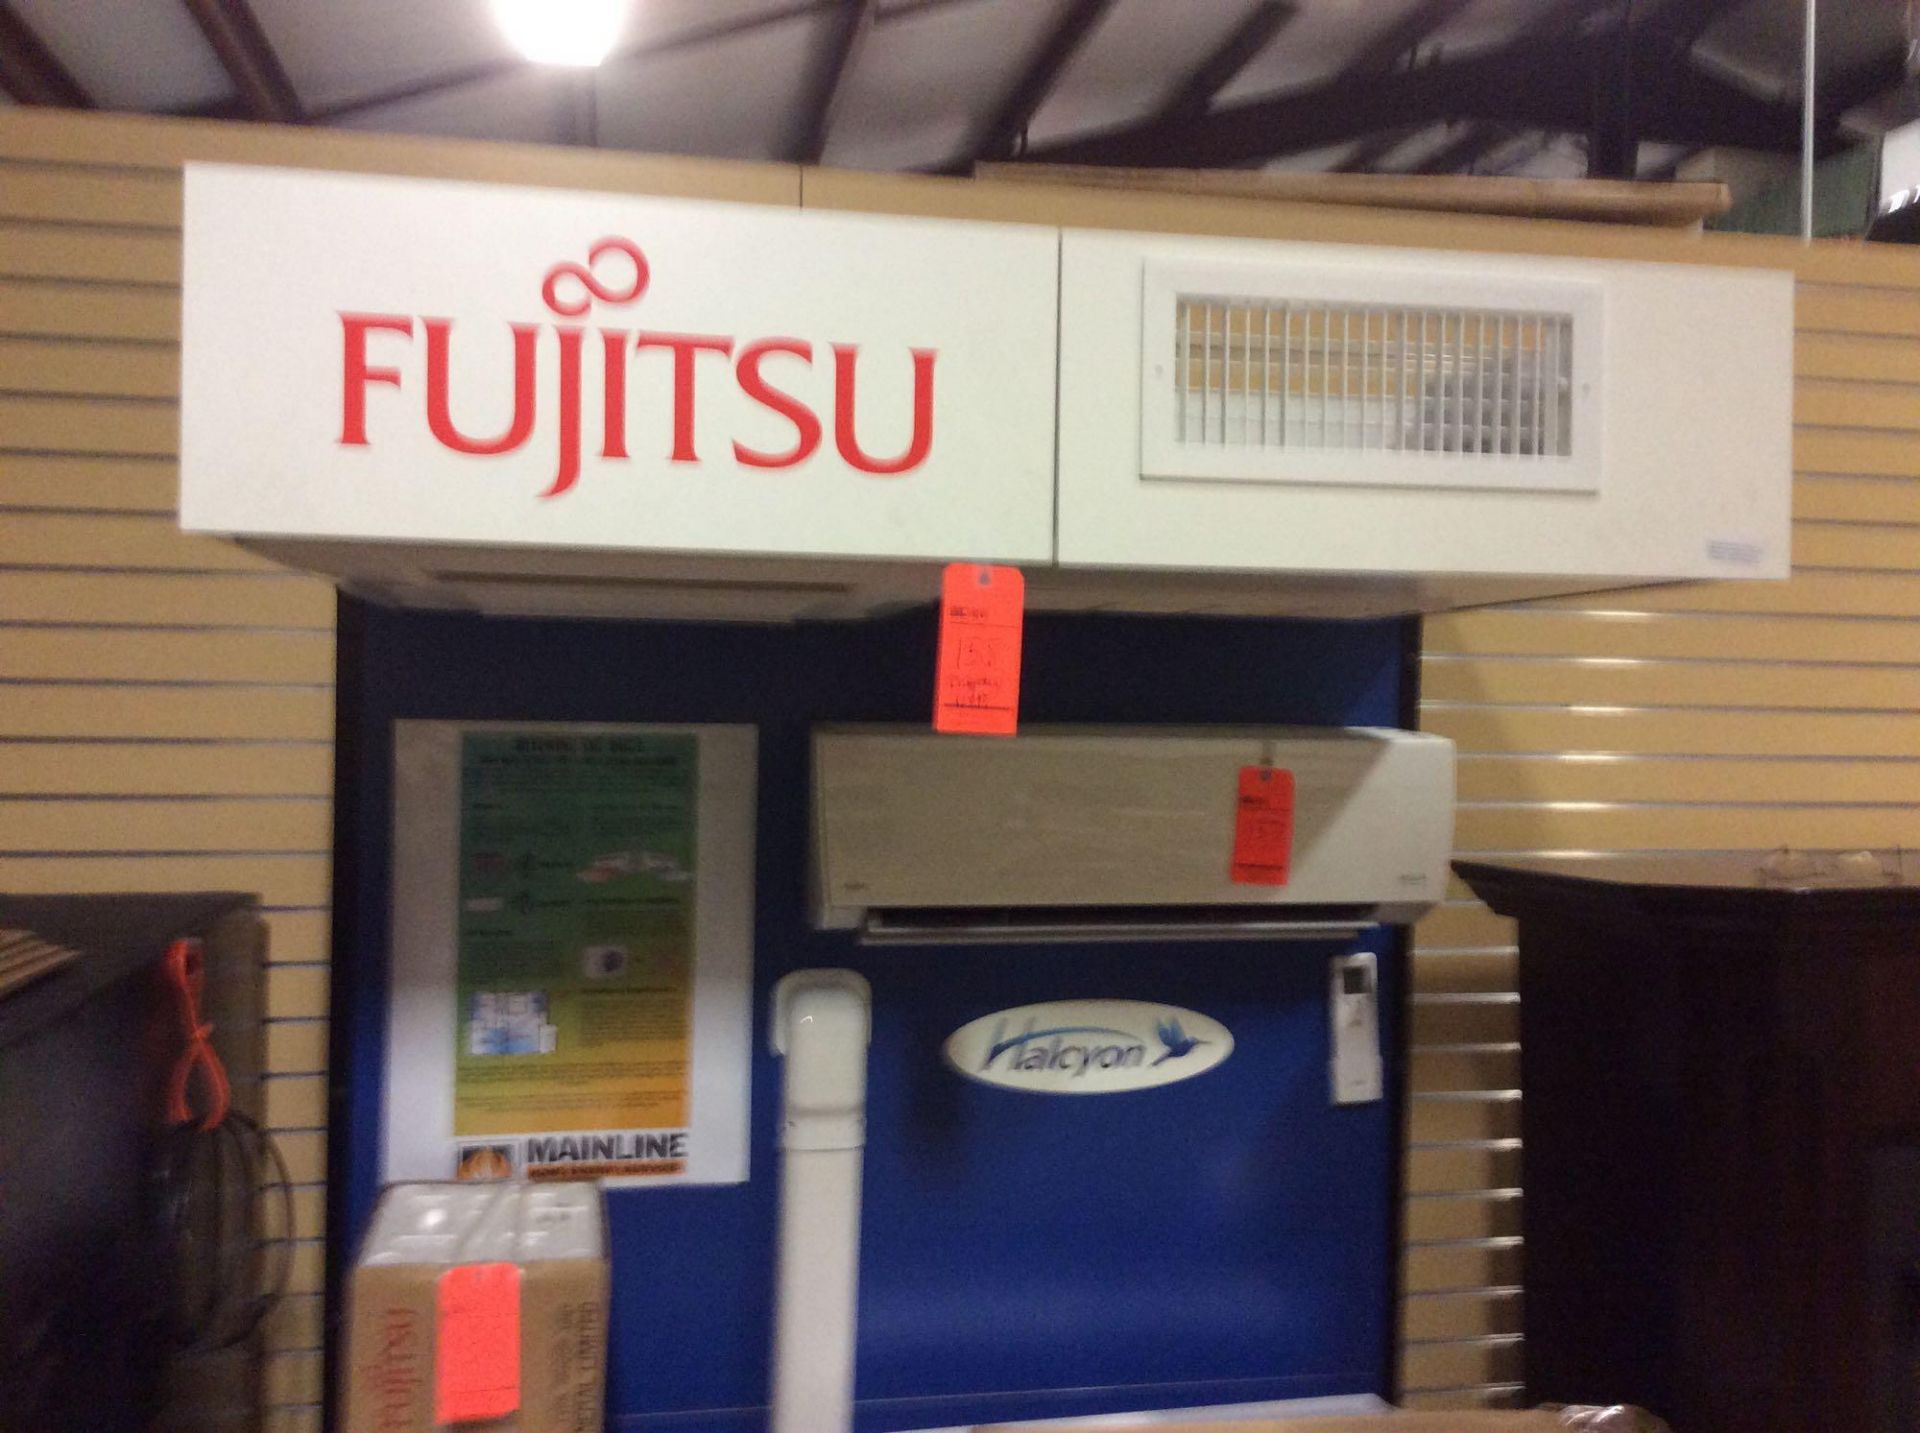 Fujitsu ceiling cassette vent fan model number AUU7RLF, serial number MVA002507, with display stand